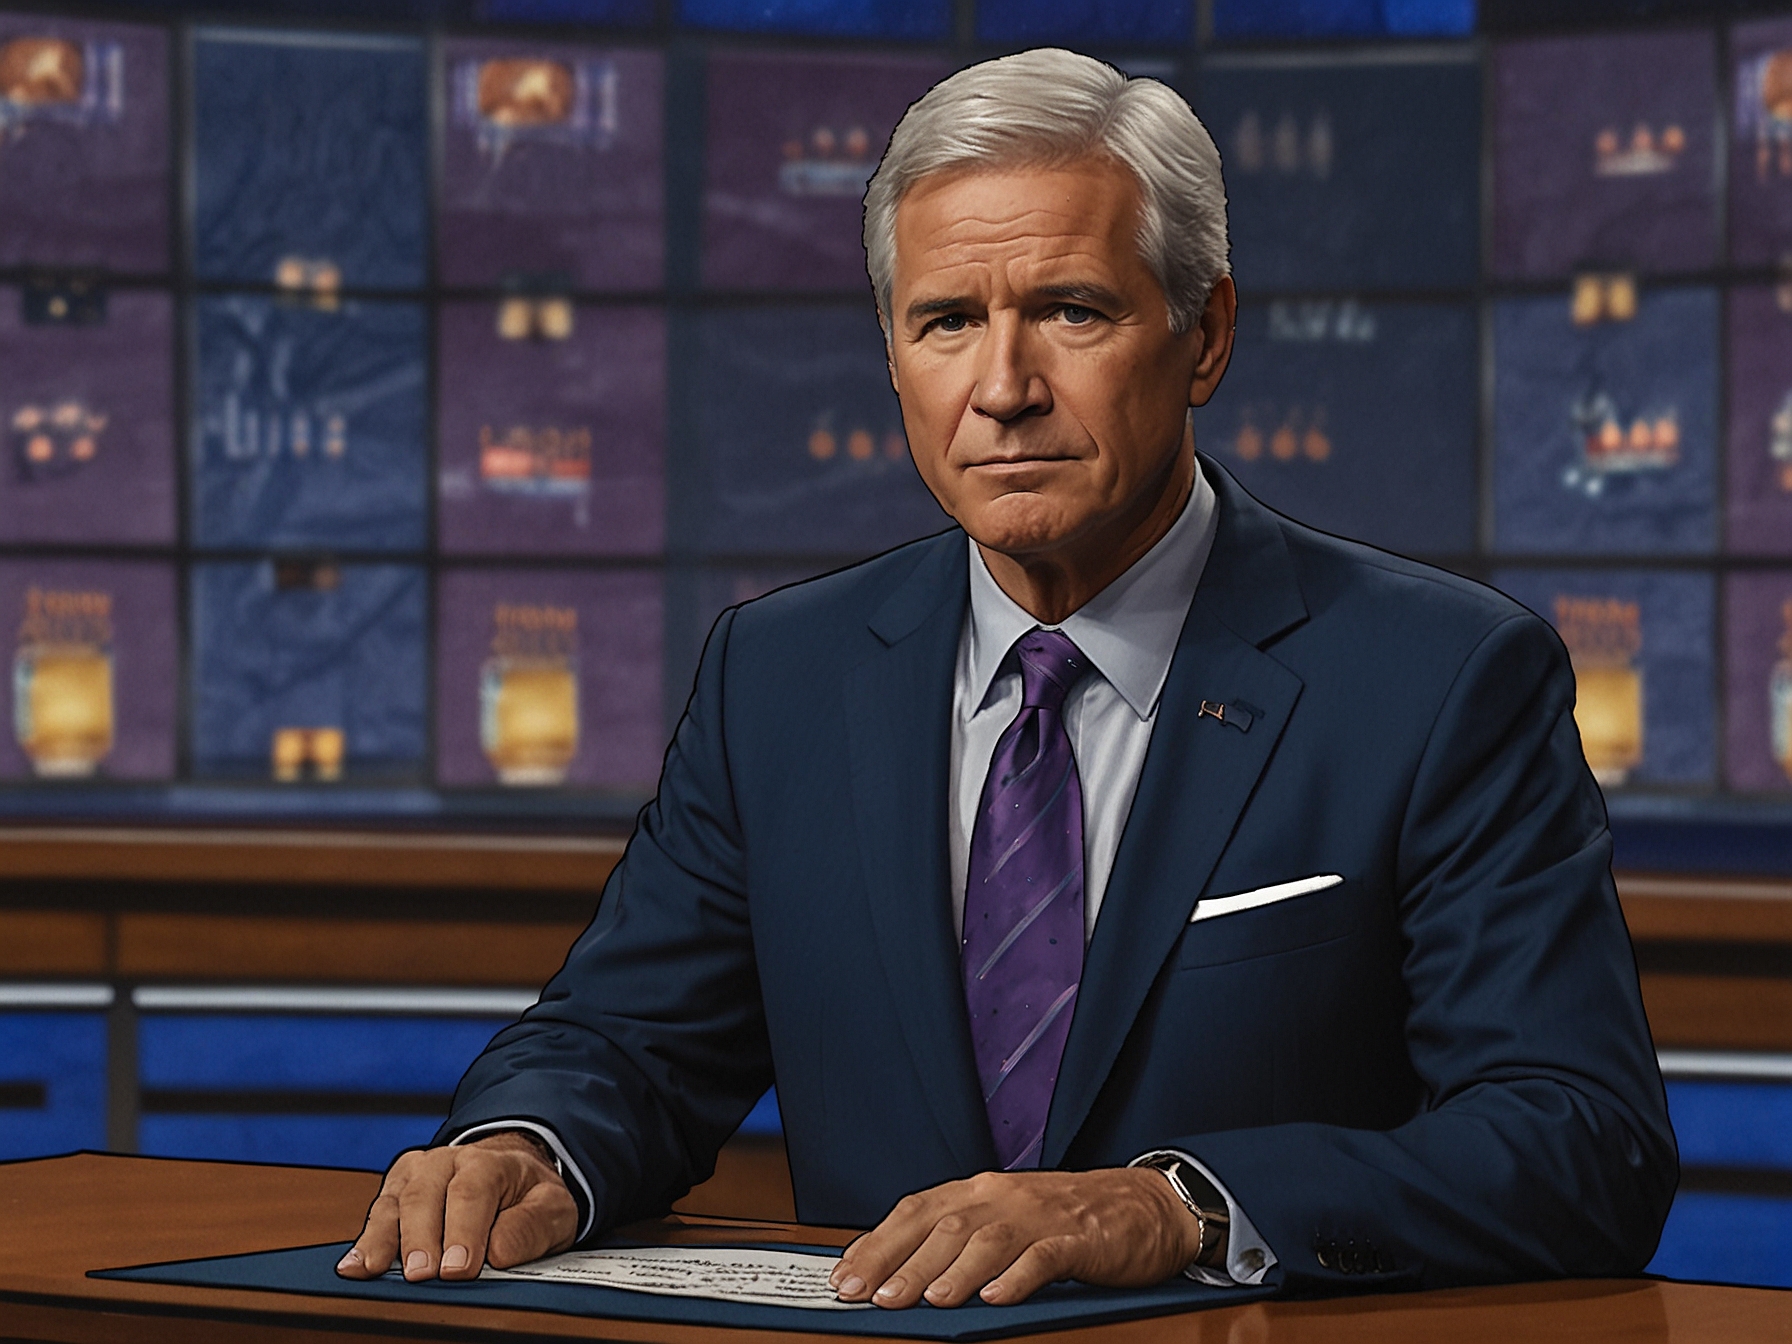 The same contestant is now on the 'Jeopardy!' set, intensely focused and confidently answering questions, embodying the traits that have made them a standout and controversial figure.